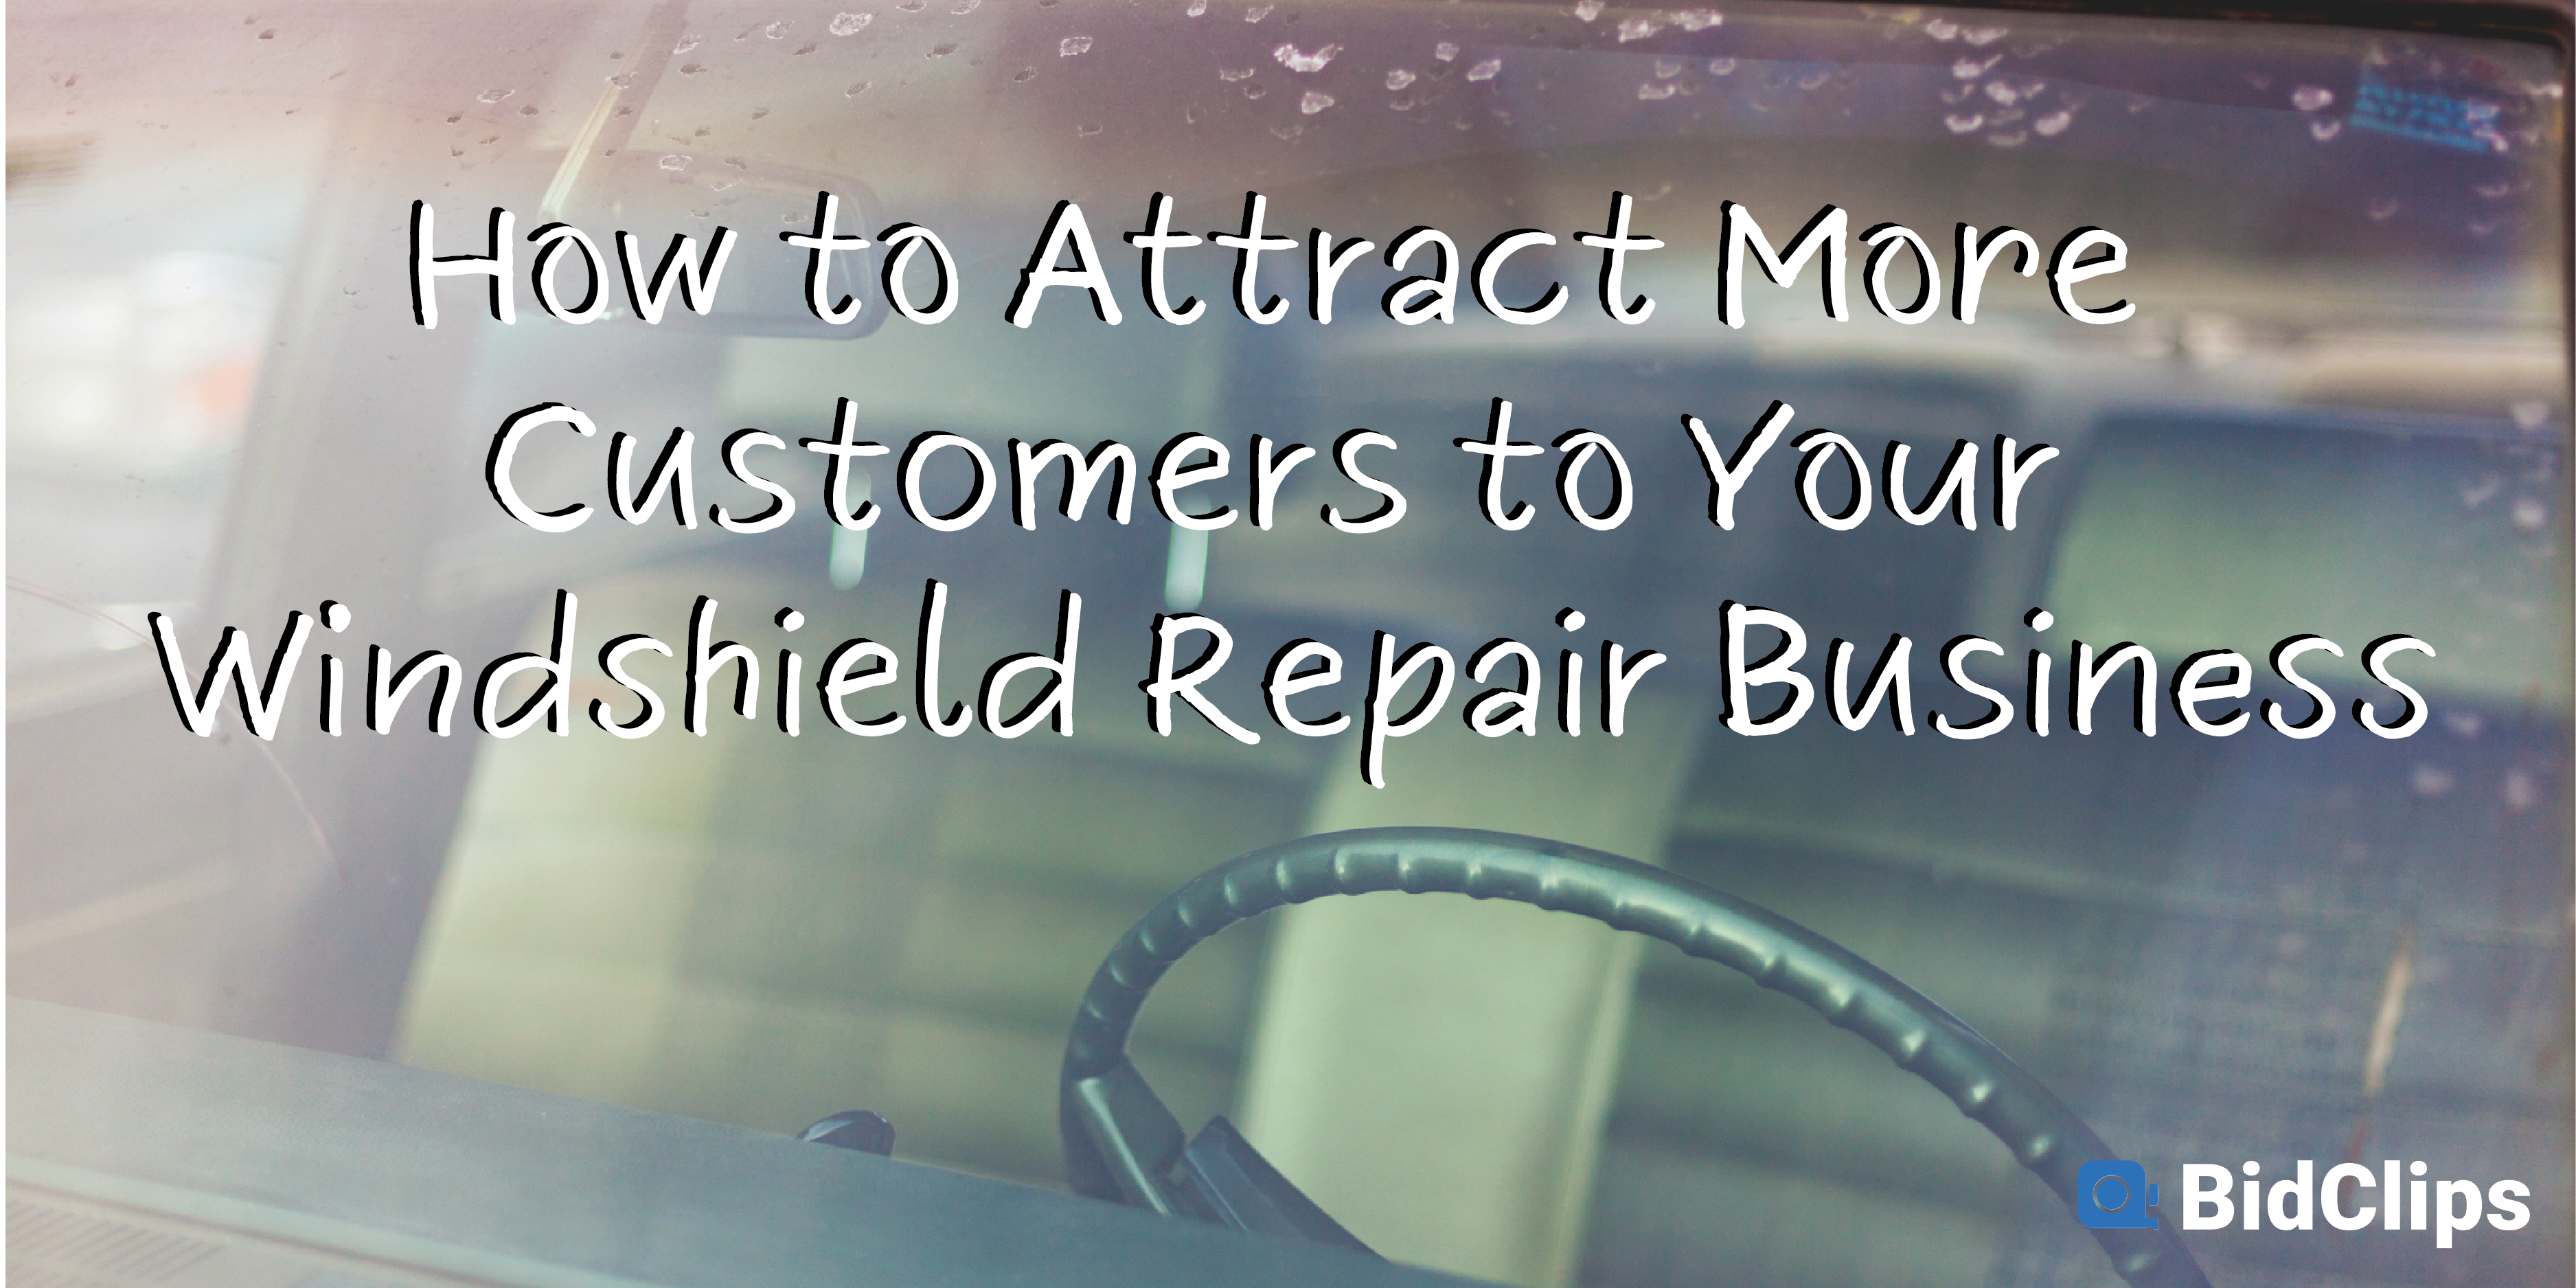 How to attract more customers to your windshield repair business